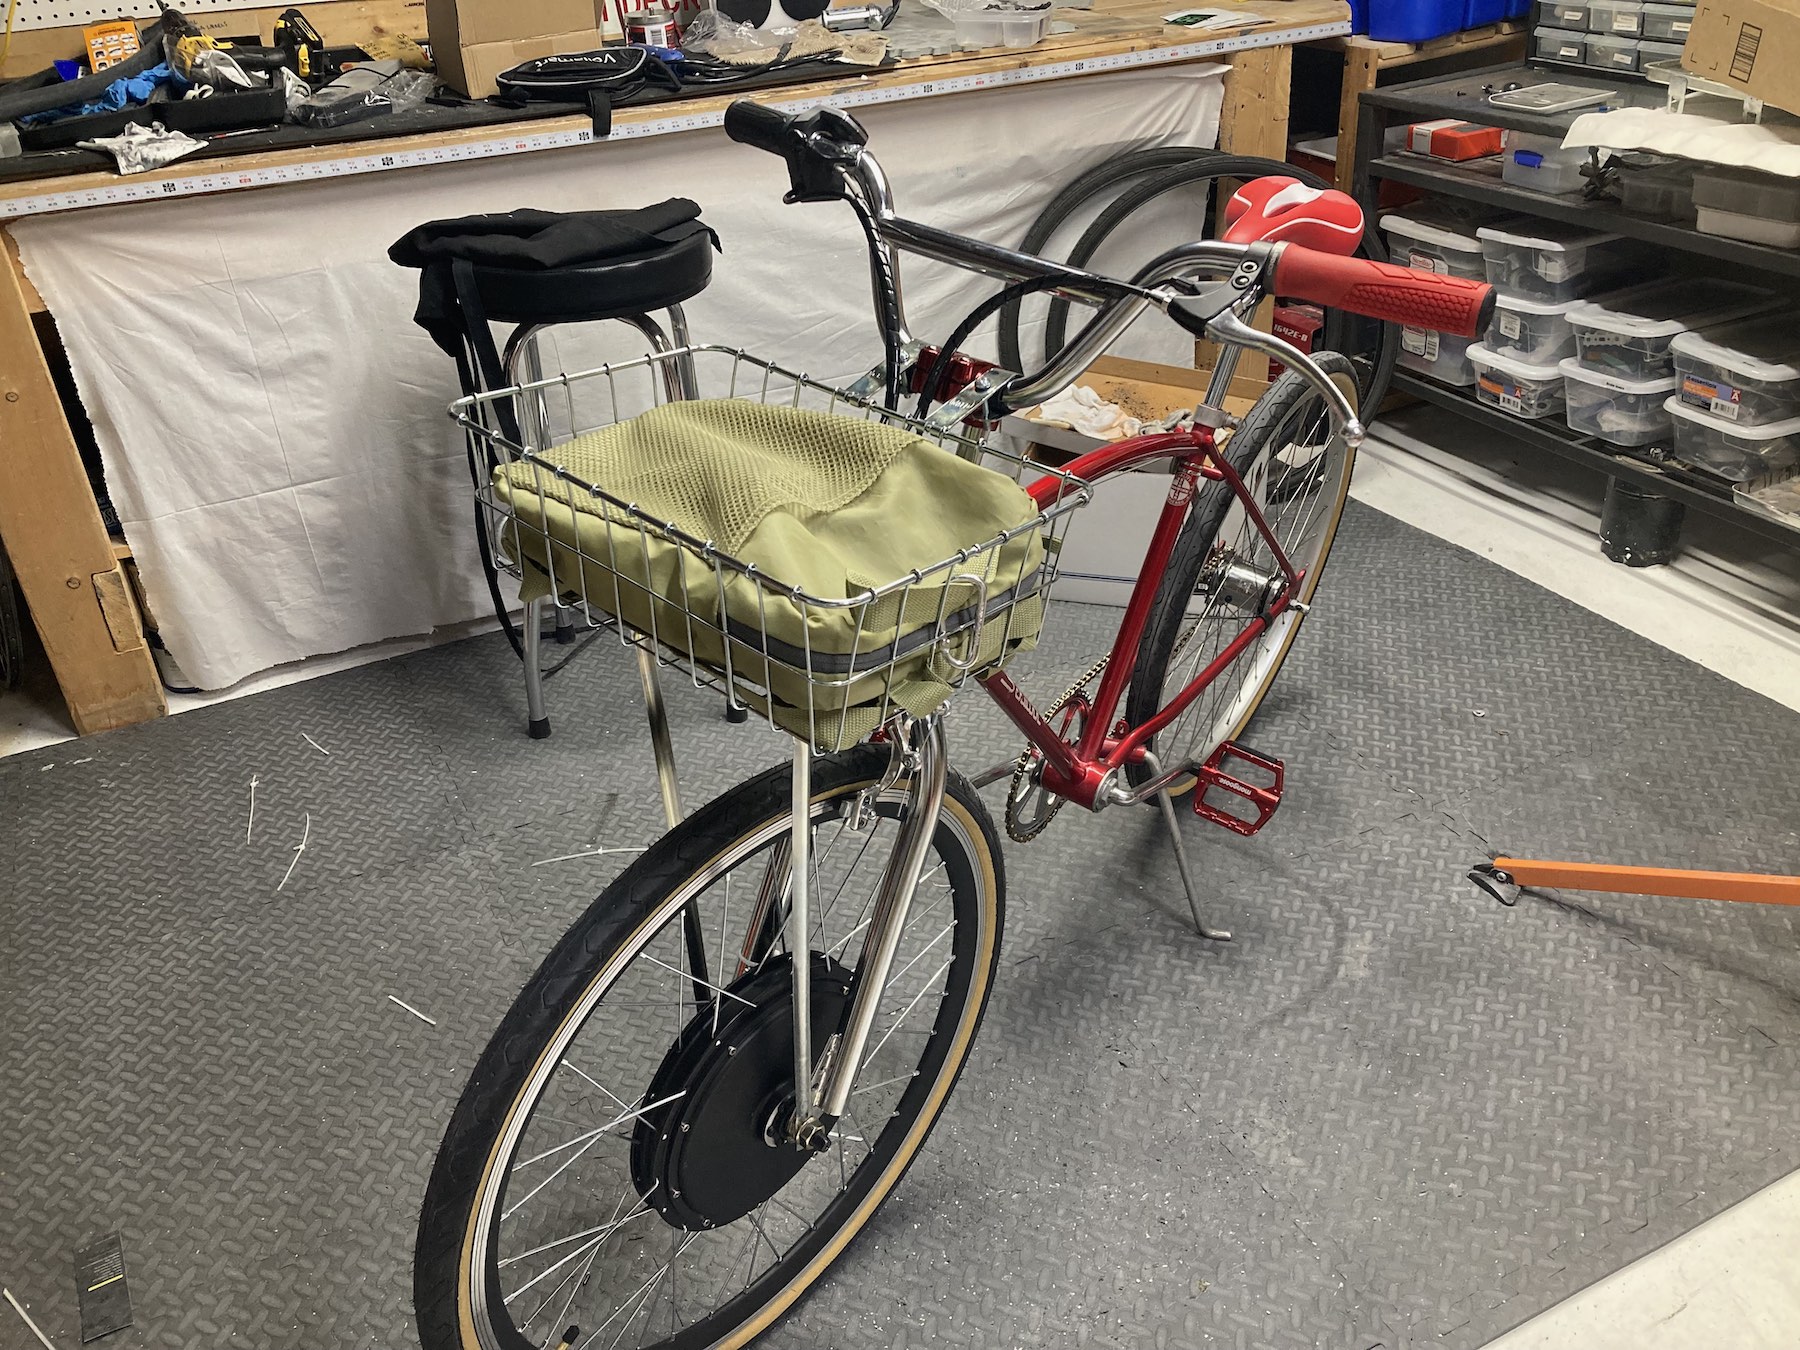 I had a cheap IKEA backpack that coincidentally fit the Wald basket perfectly and hid all the electric parts. You can also see the brake levers have changed. That's because the e-bike kit cuts power when you use the brakes, so you have to use their levers.